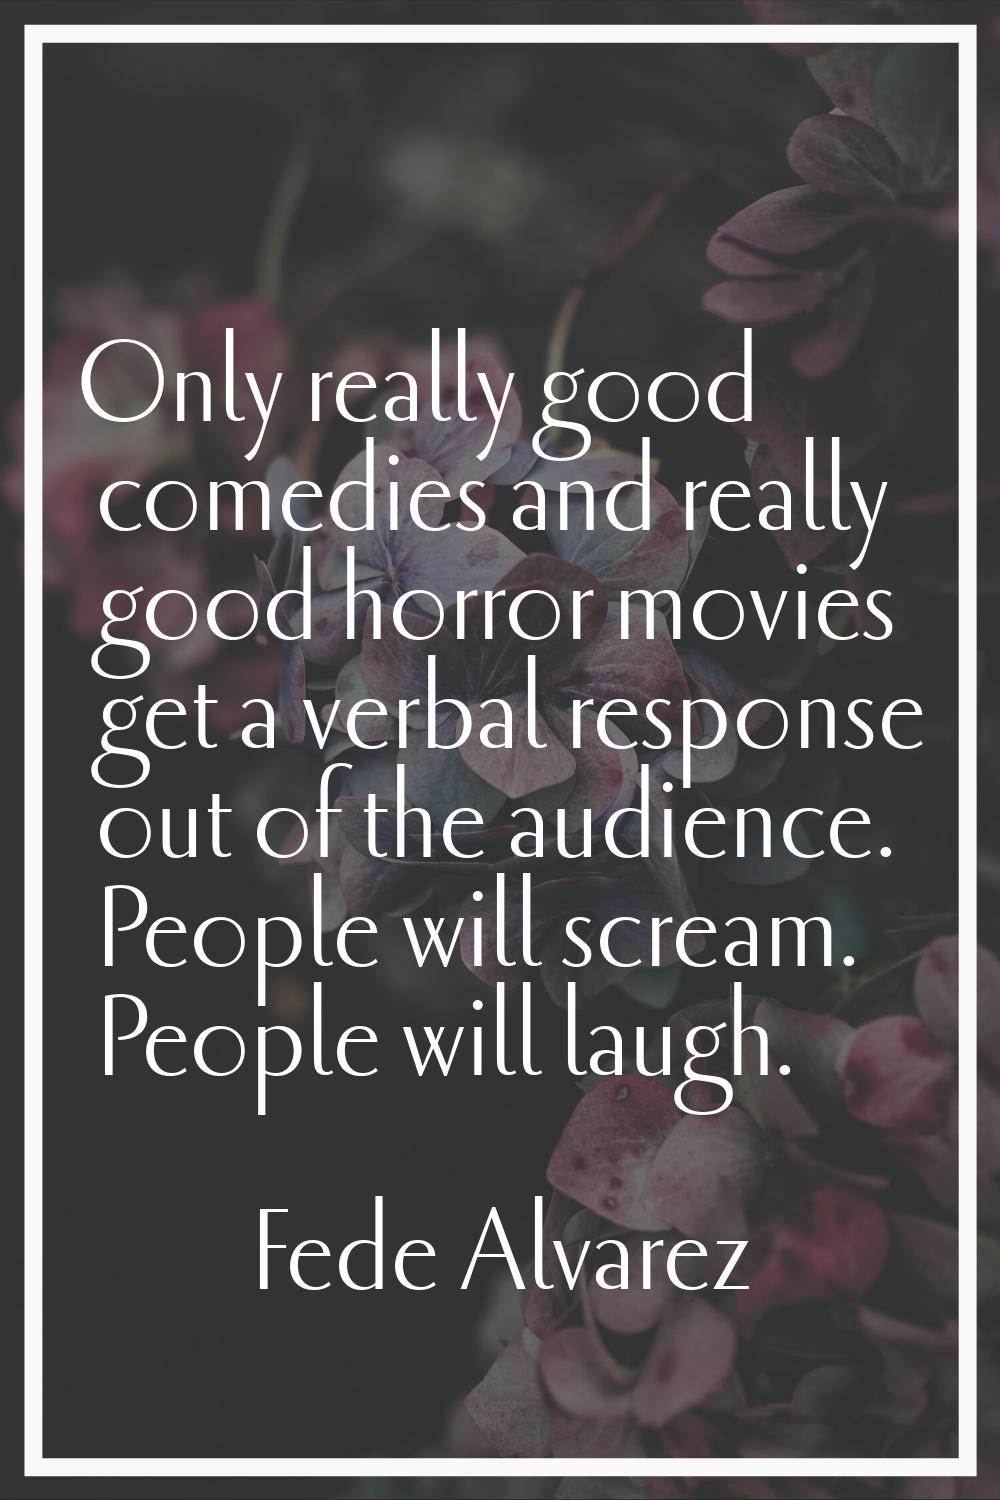 Only really good comedies and really good horror movies get a verbal response out of the audience. 